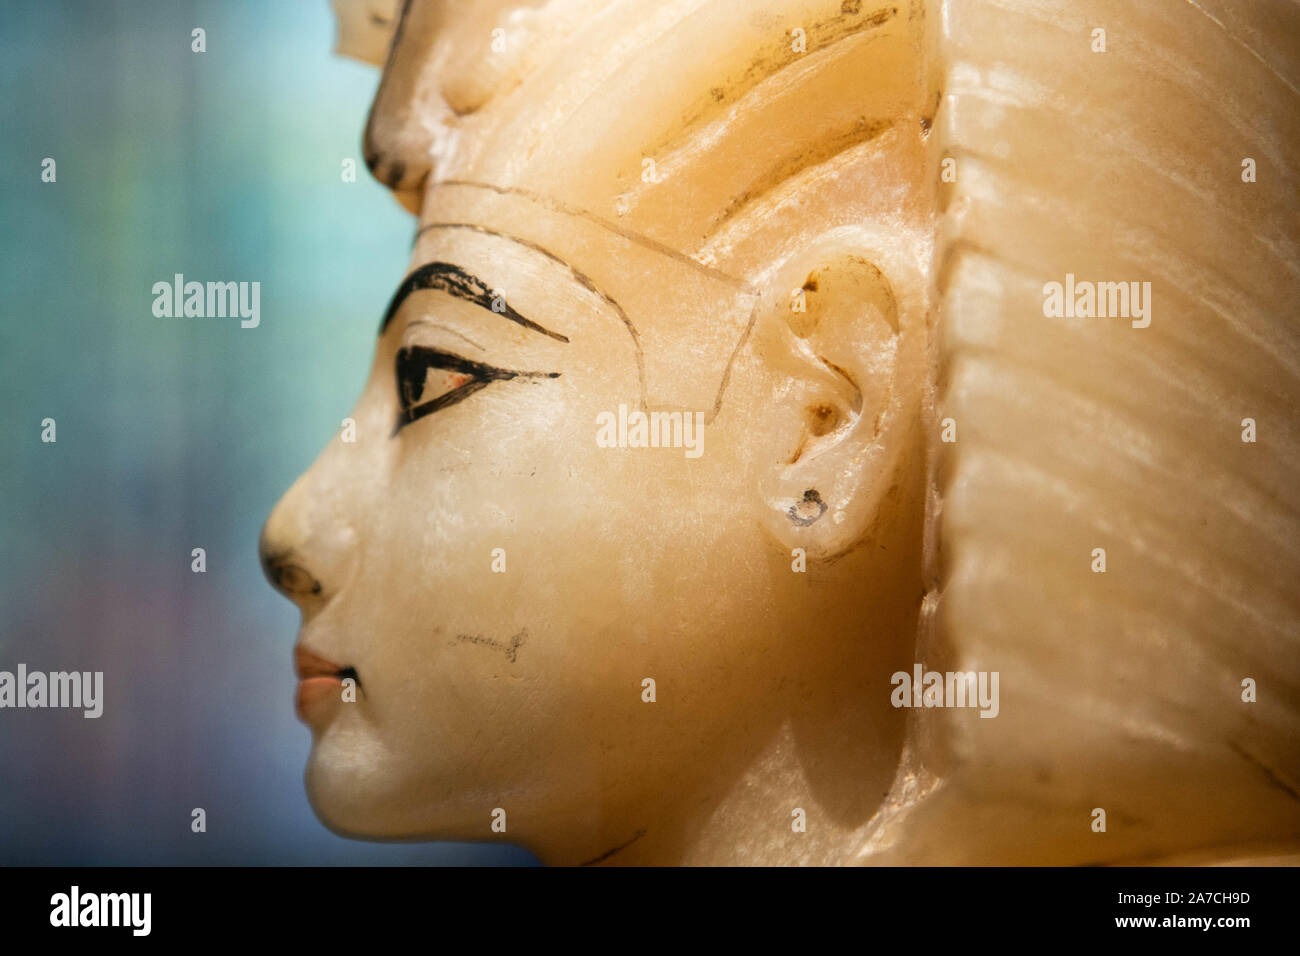 Saatchi Gallery London, UK. 1 November 2019. A preview  featuring the largest collection of 60 of   treasures  and original artifacts from Tutankhamun's tomb ever to leave Egypt. The exhibition at the Saatchi Gallery will run from 2 November until 3 May 2020. amer ghazzal /Alamy live News Stock Photo